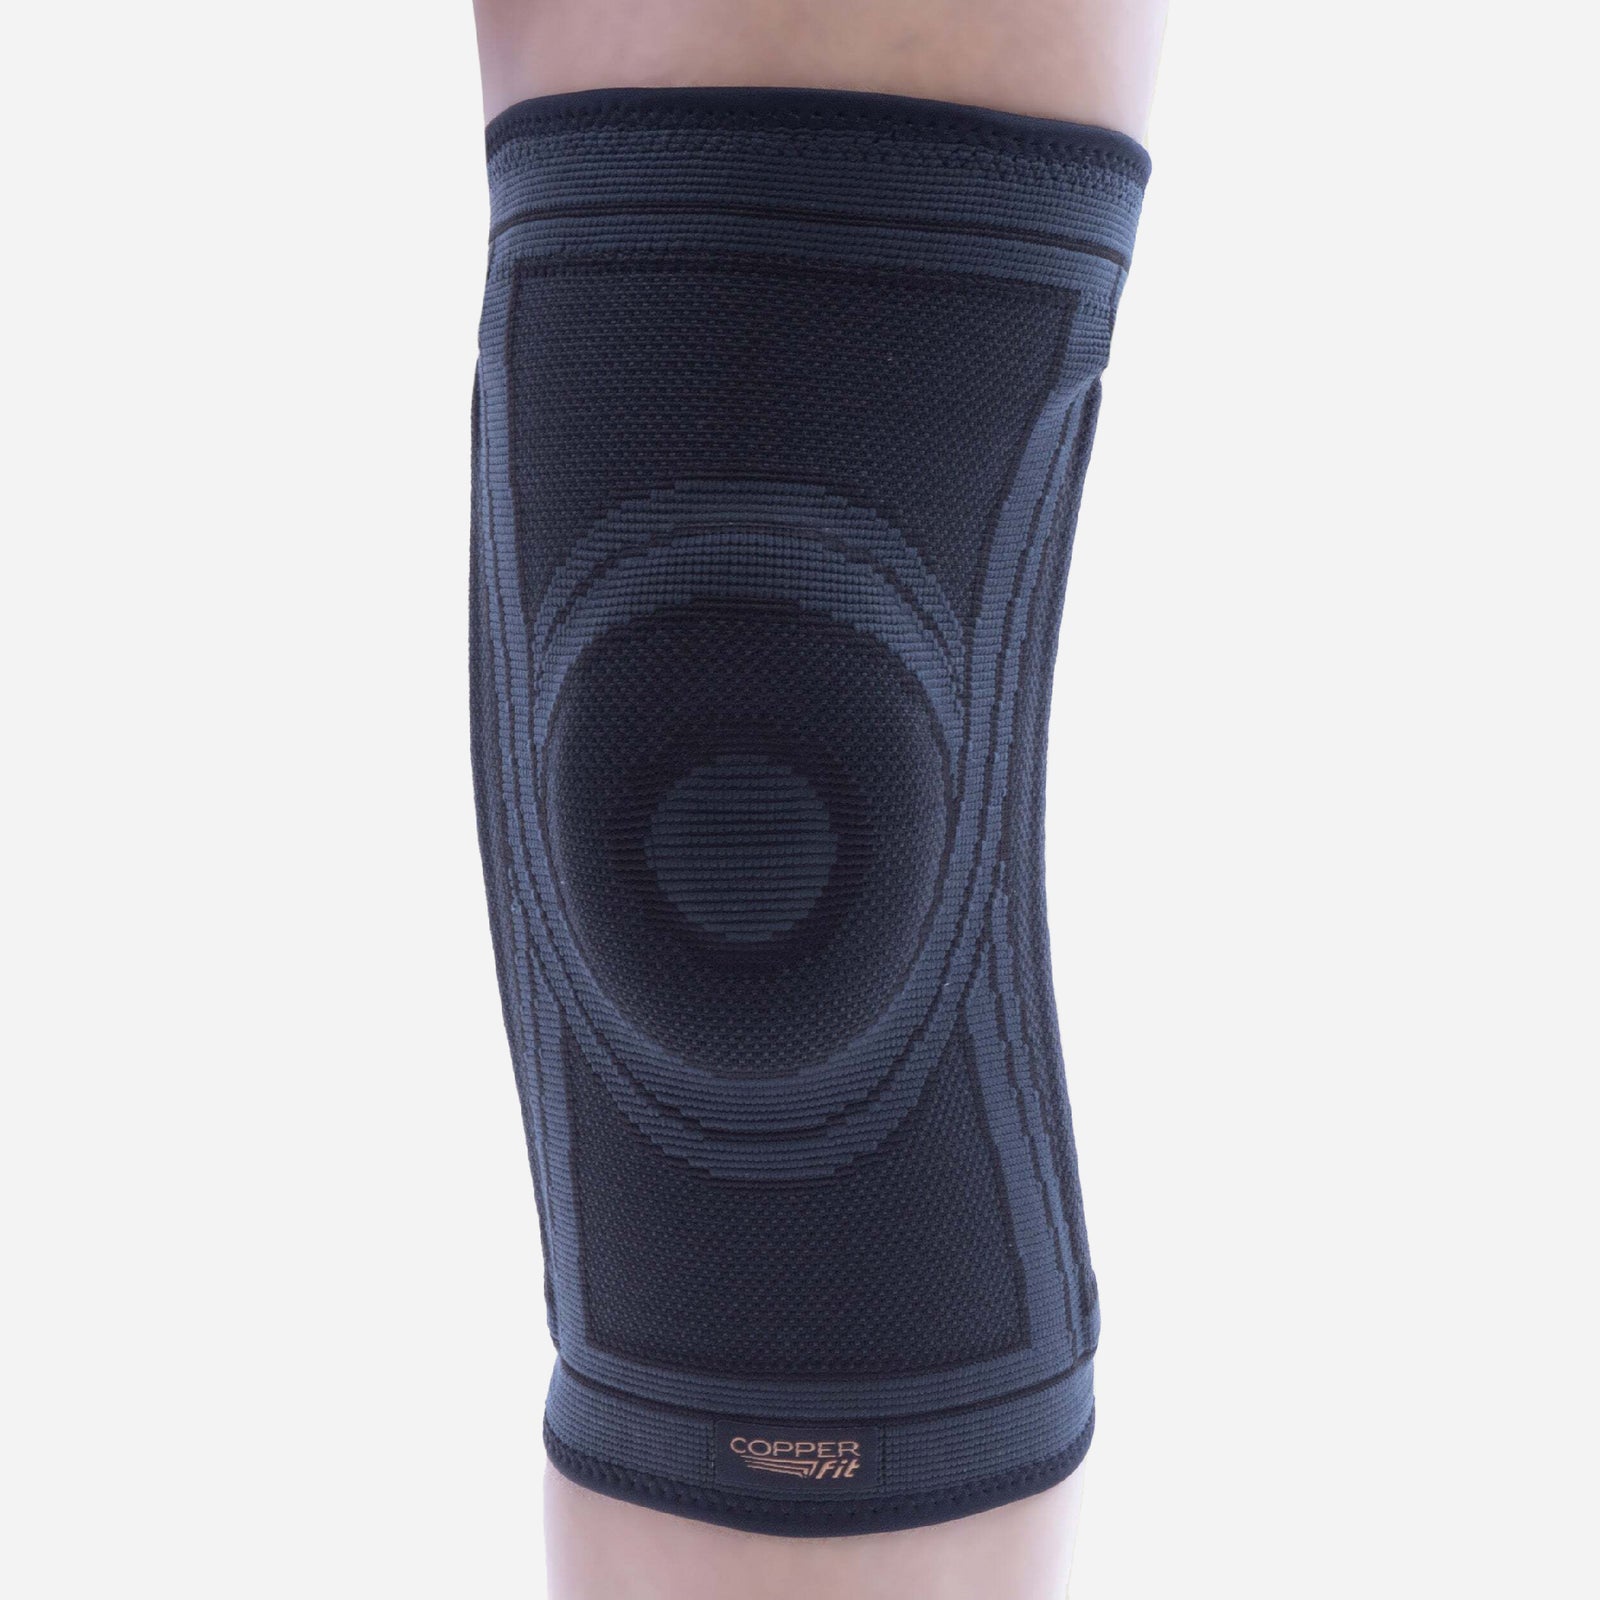 Copper Fit Pro Series Ankle Sleeve